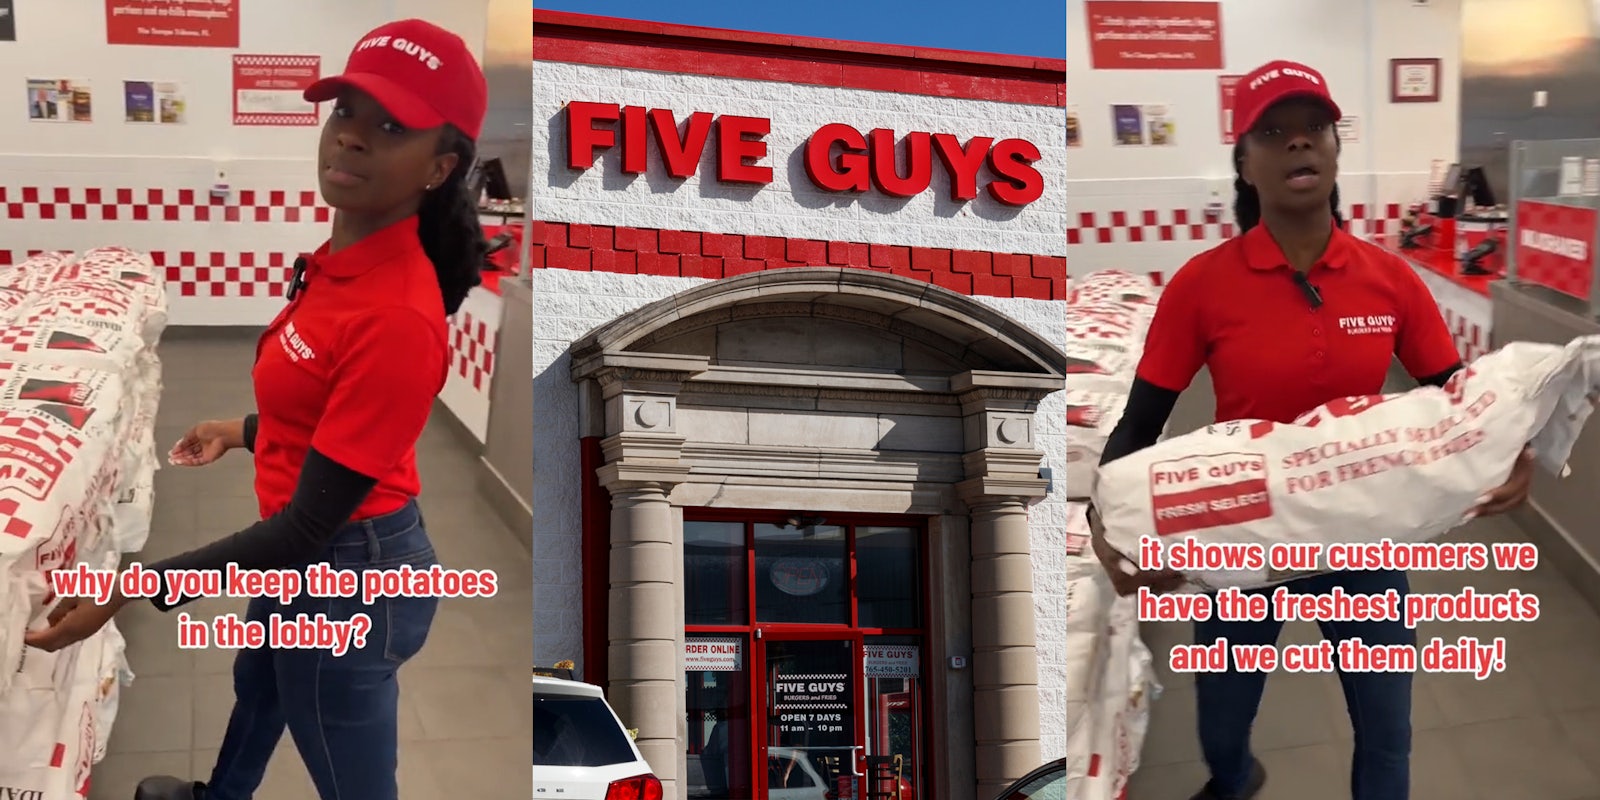 Five Guys employee reaching out for potatoes with caption 'why do you keep the potatoes in the lobby?' (l) Five Guys building with sign (c) Five Guys employee carrying potatoes with caption 'it shows our customers we have the freshest products and we cut them daily!' (r)